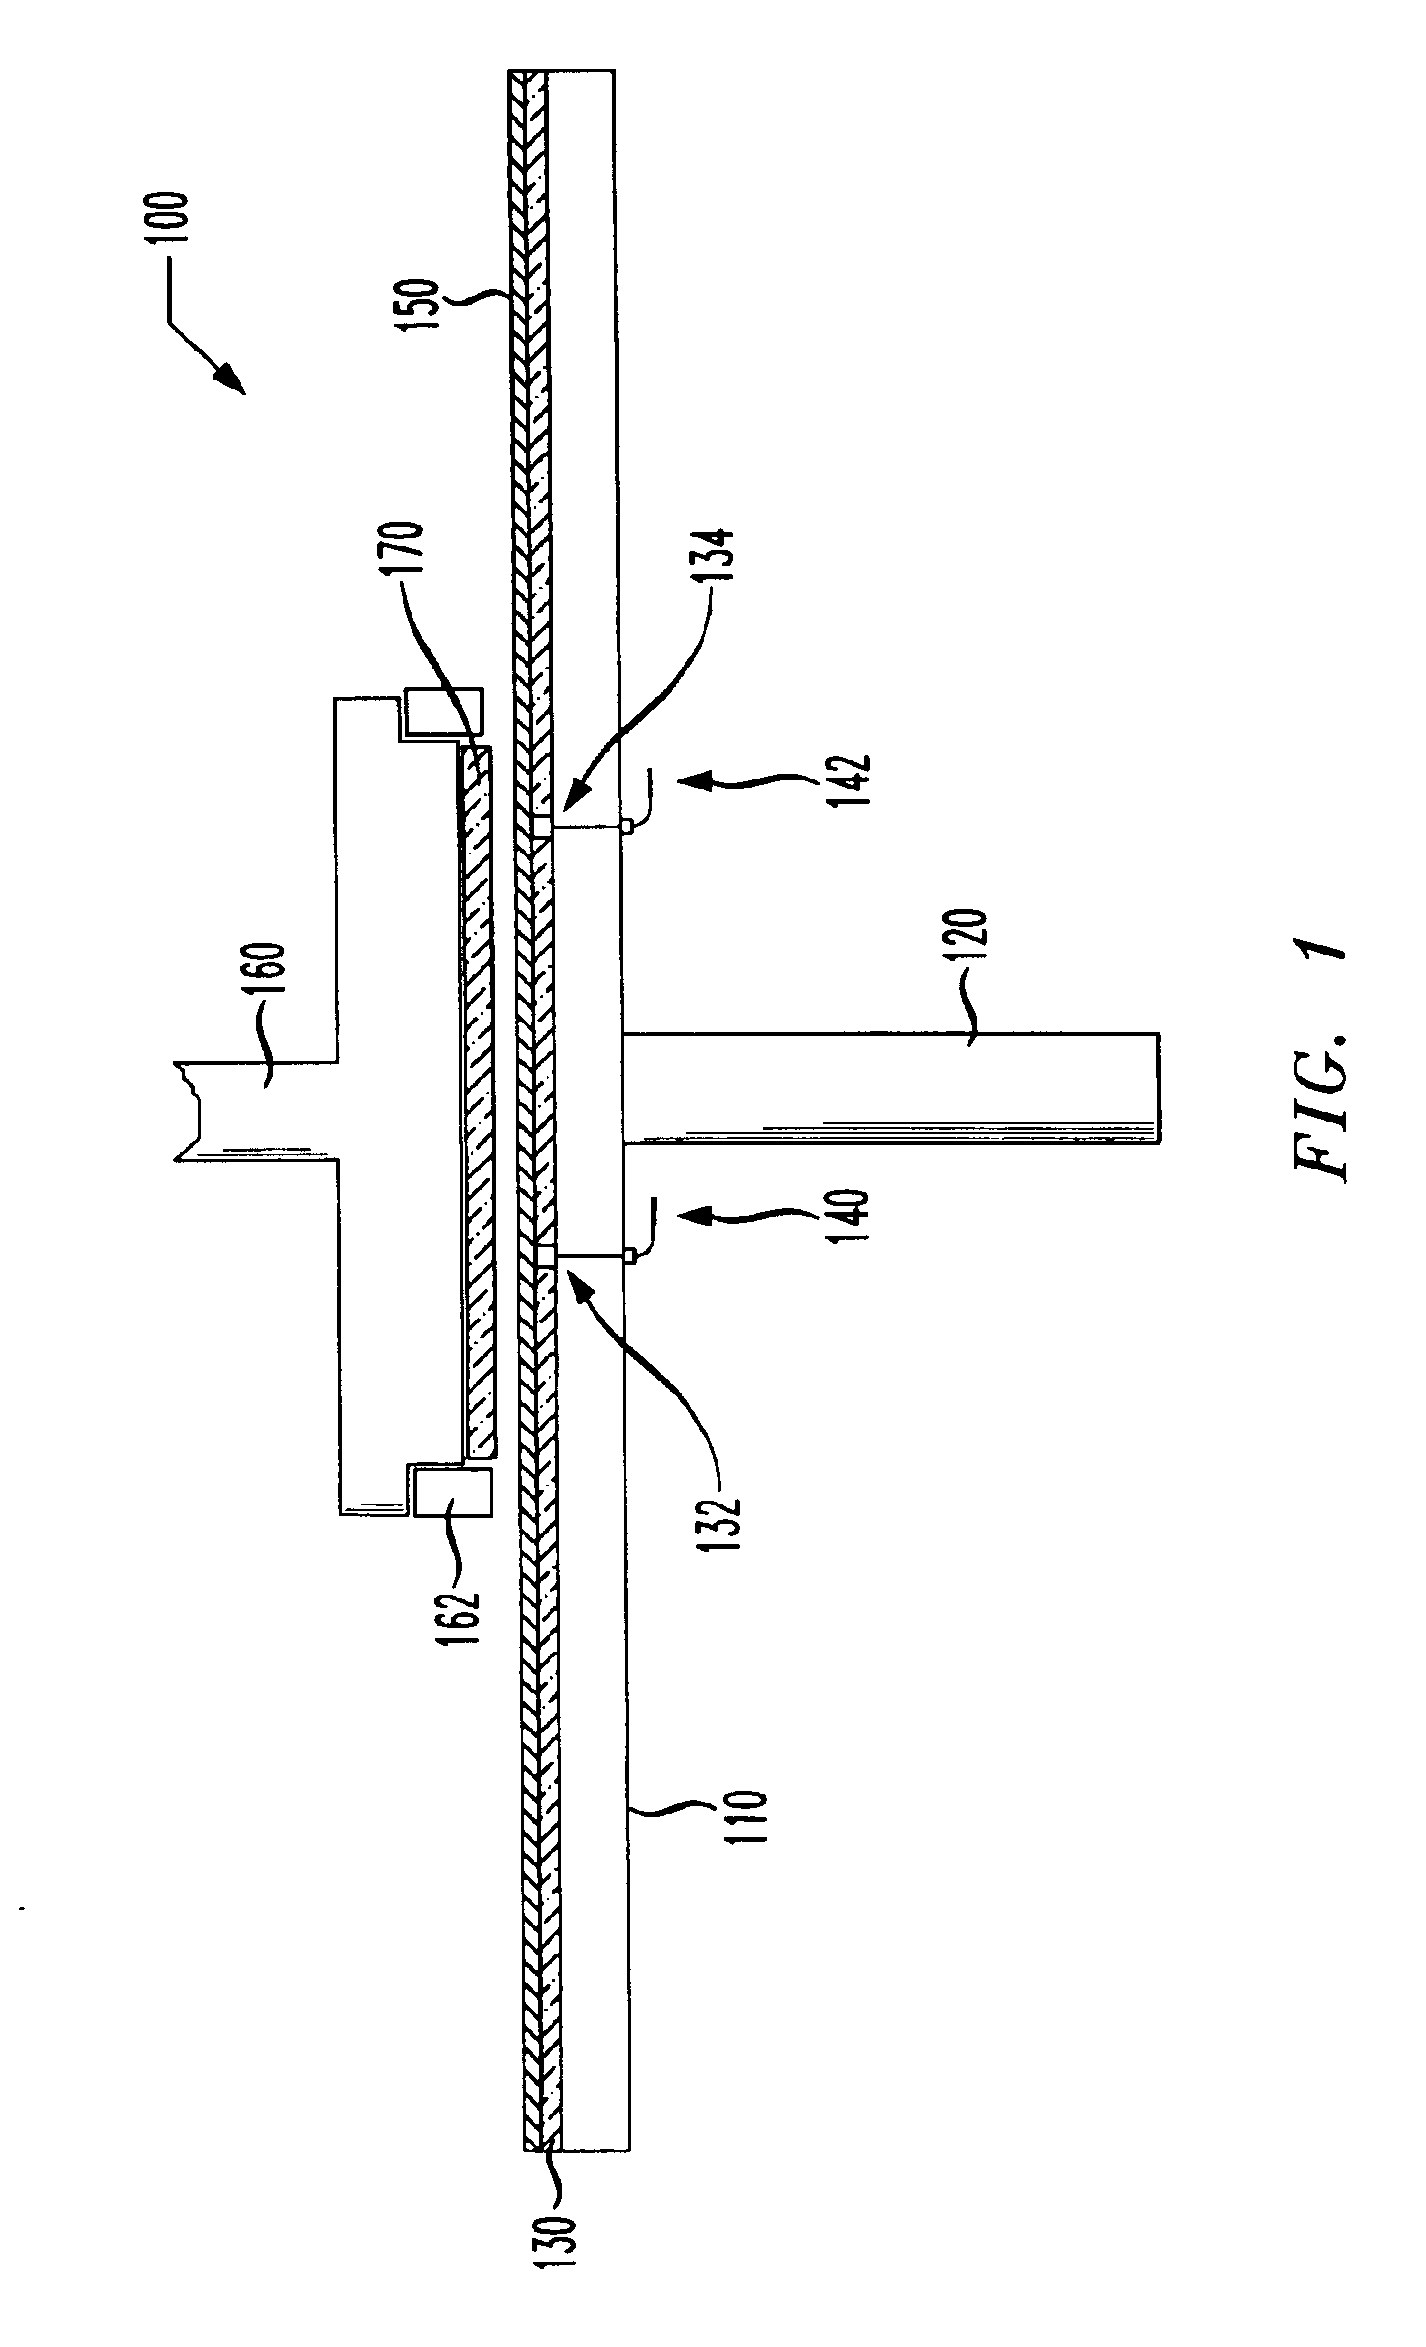 Optical closed-loop control system for a CMP apparatus and method of manufacture thereof